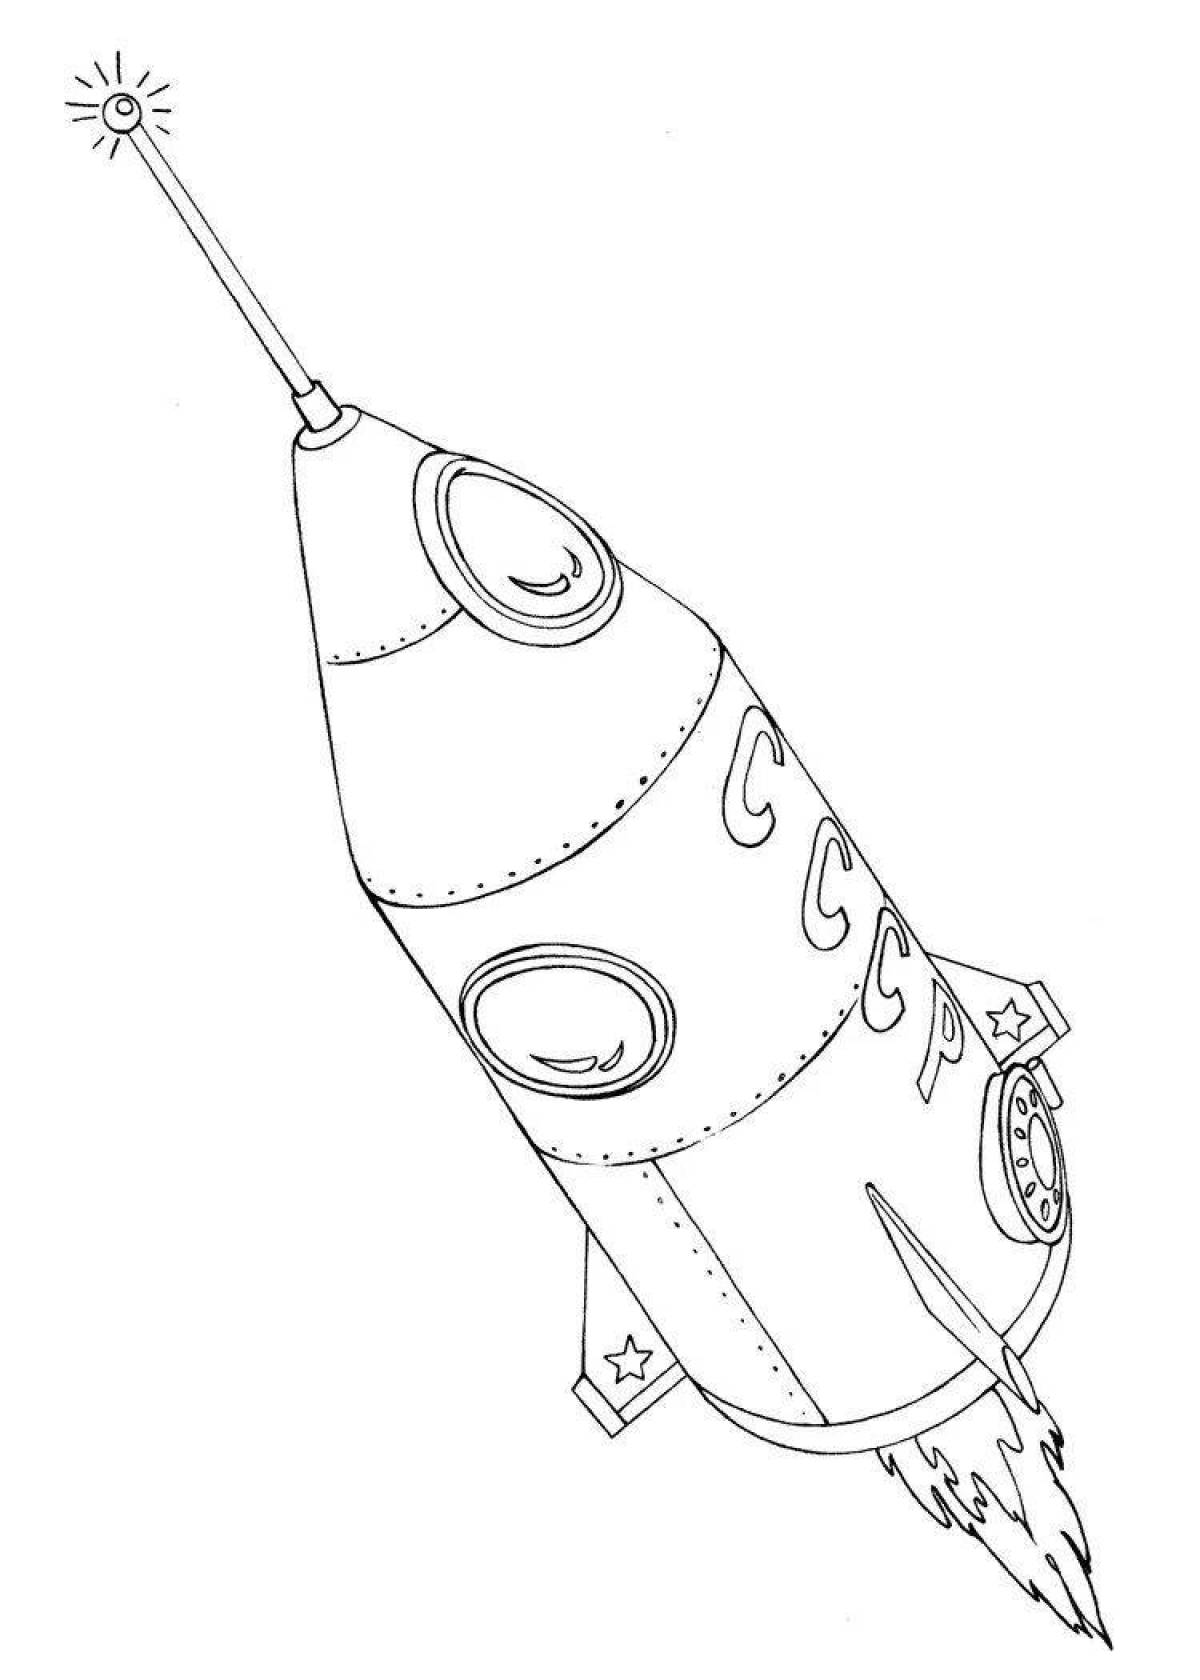 Glorious space rocket coloring page